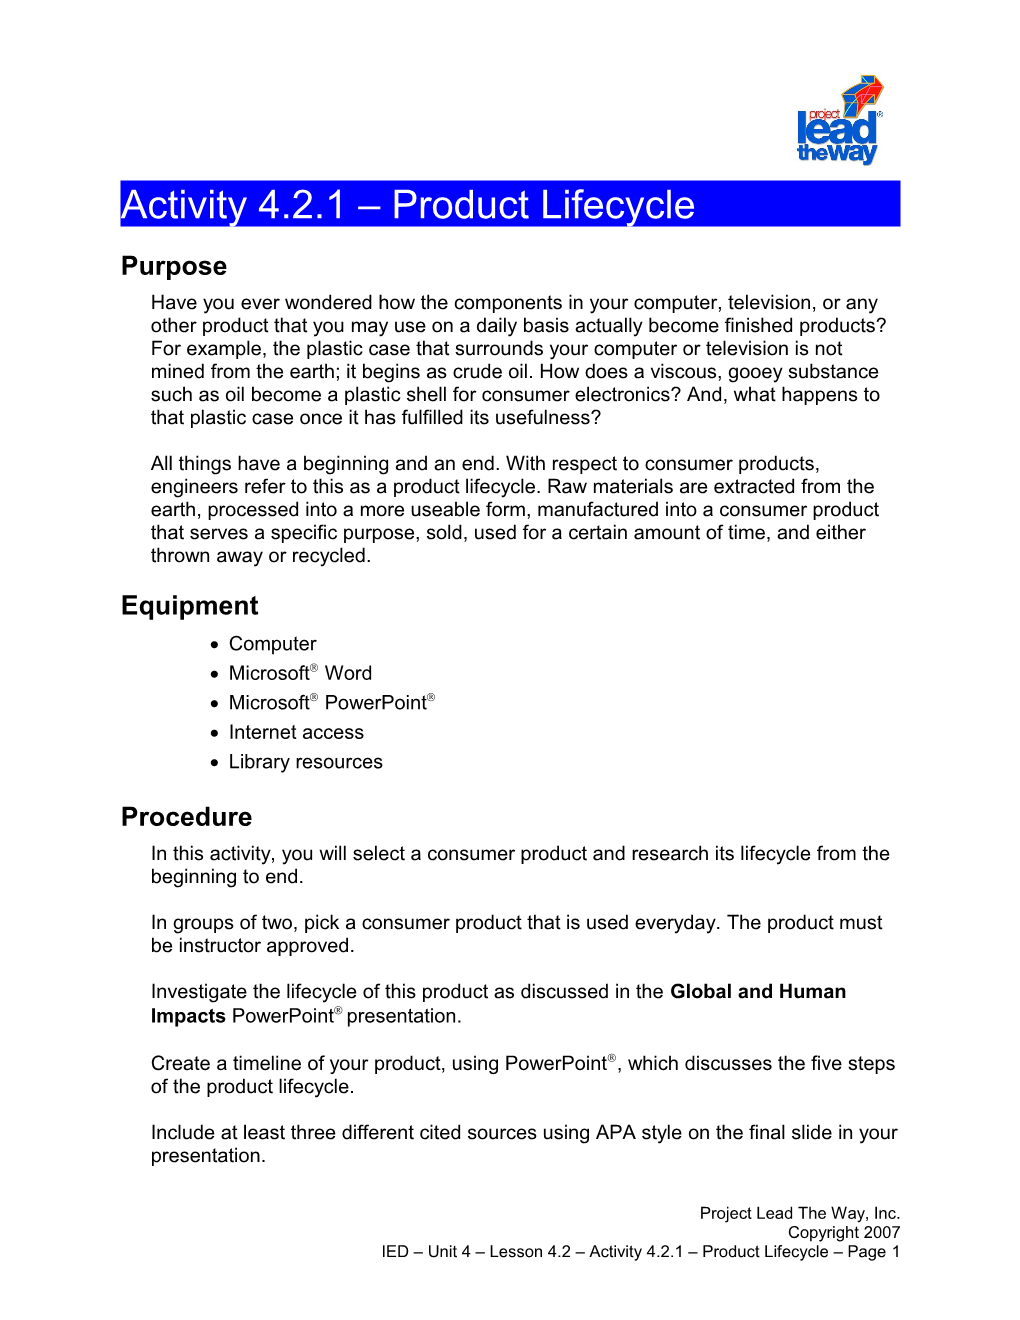 Activity 4.2.1: Product Lifecycle